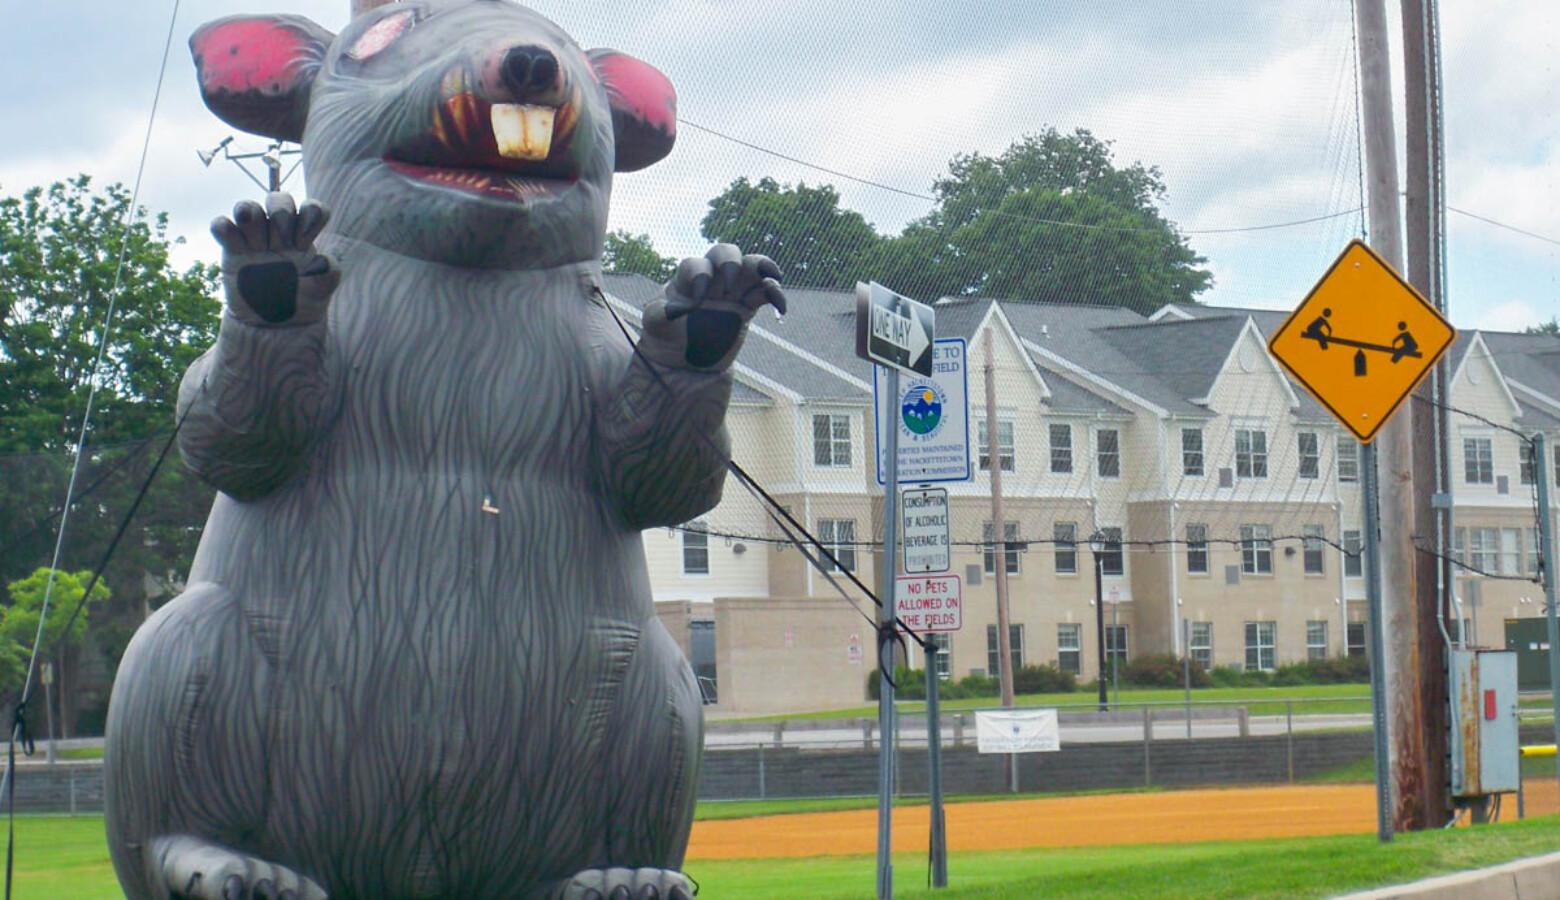 An inflatable rat in Hackettstown, New Jersey similar to the one used in an Elkhart demonstration. (Erik Anderson/Wikimedia Commons)